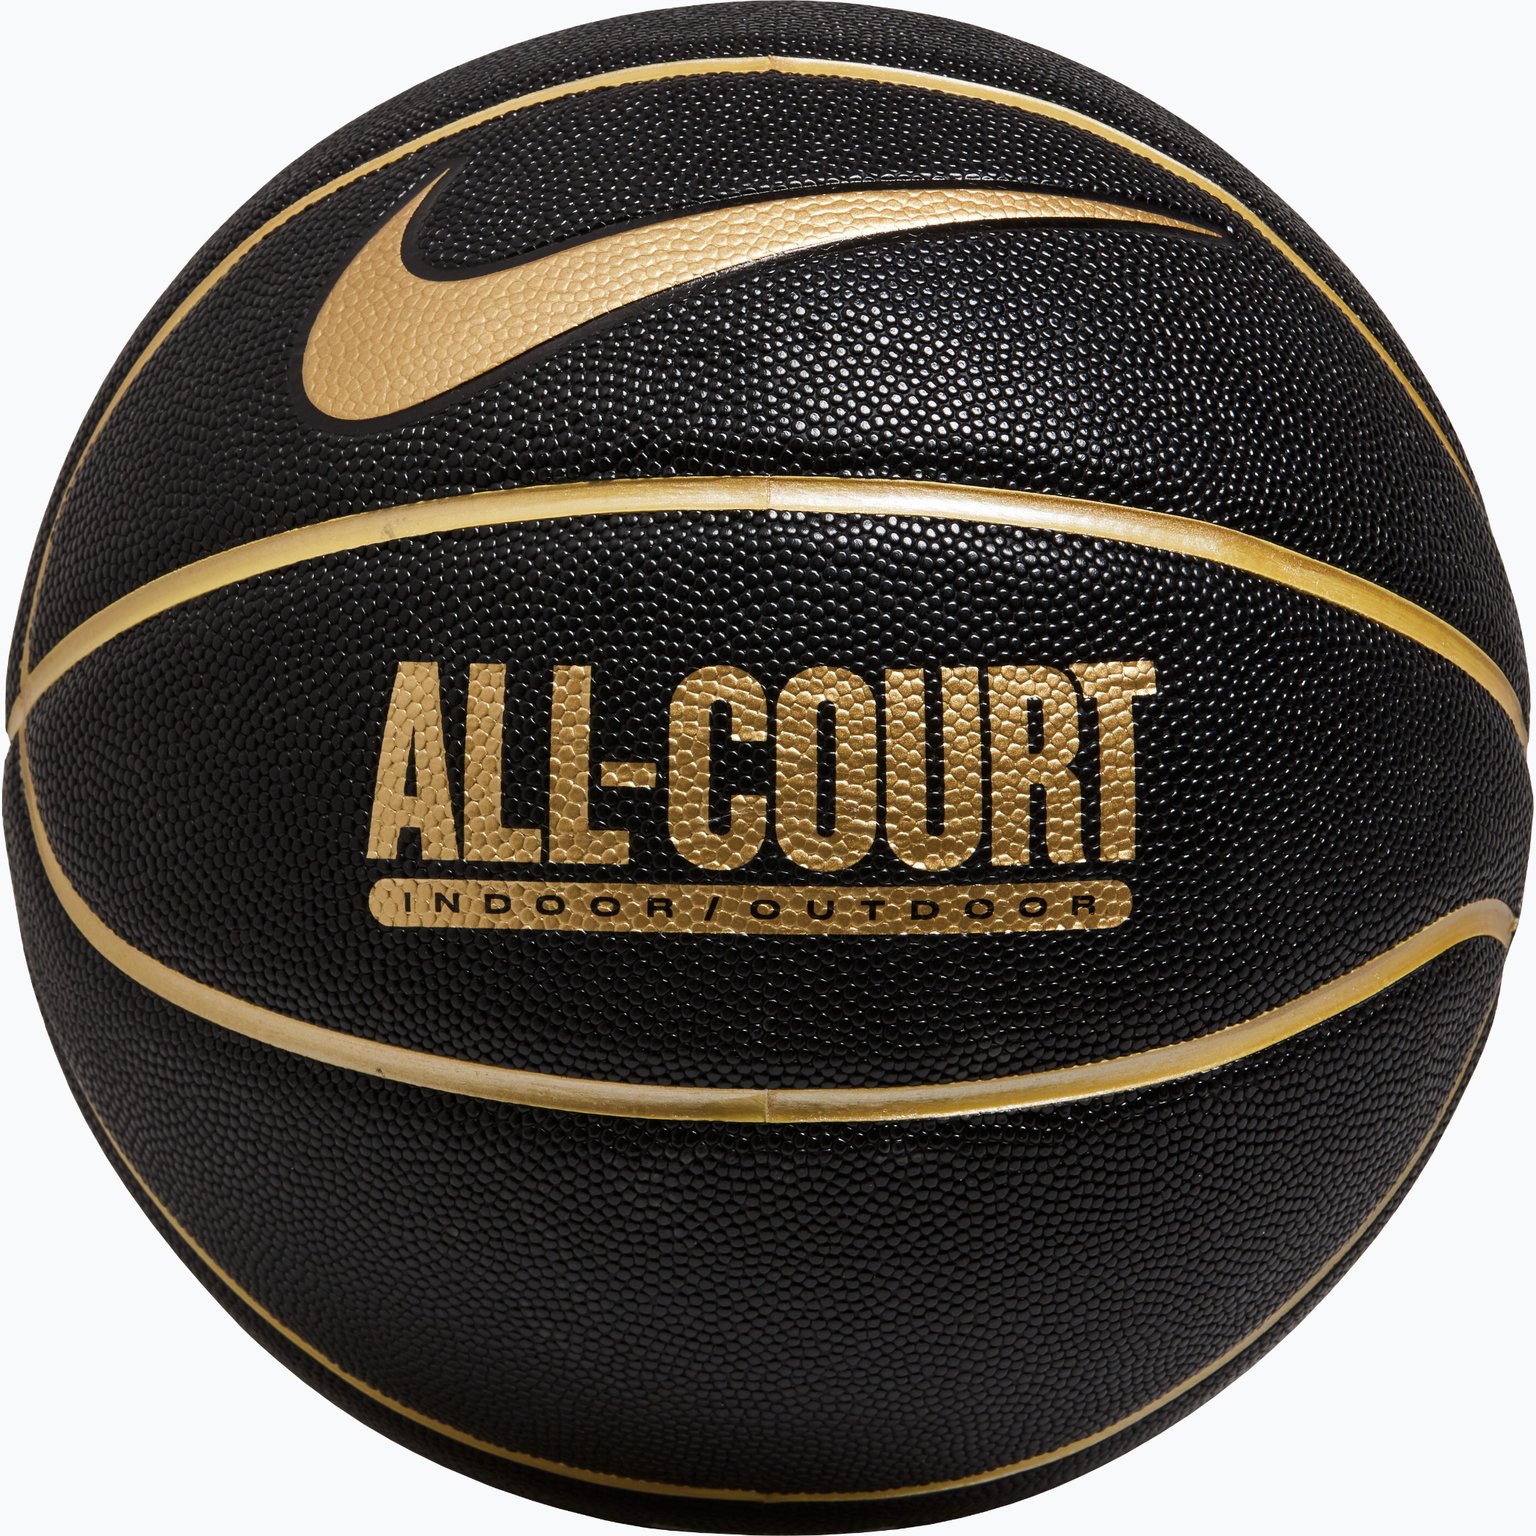 Everyday All Court 8p basketboll